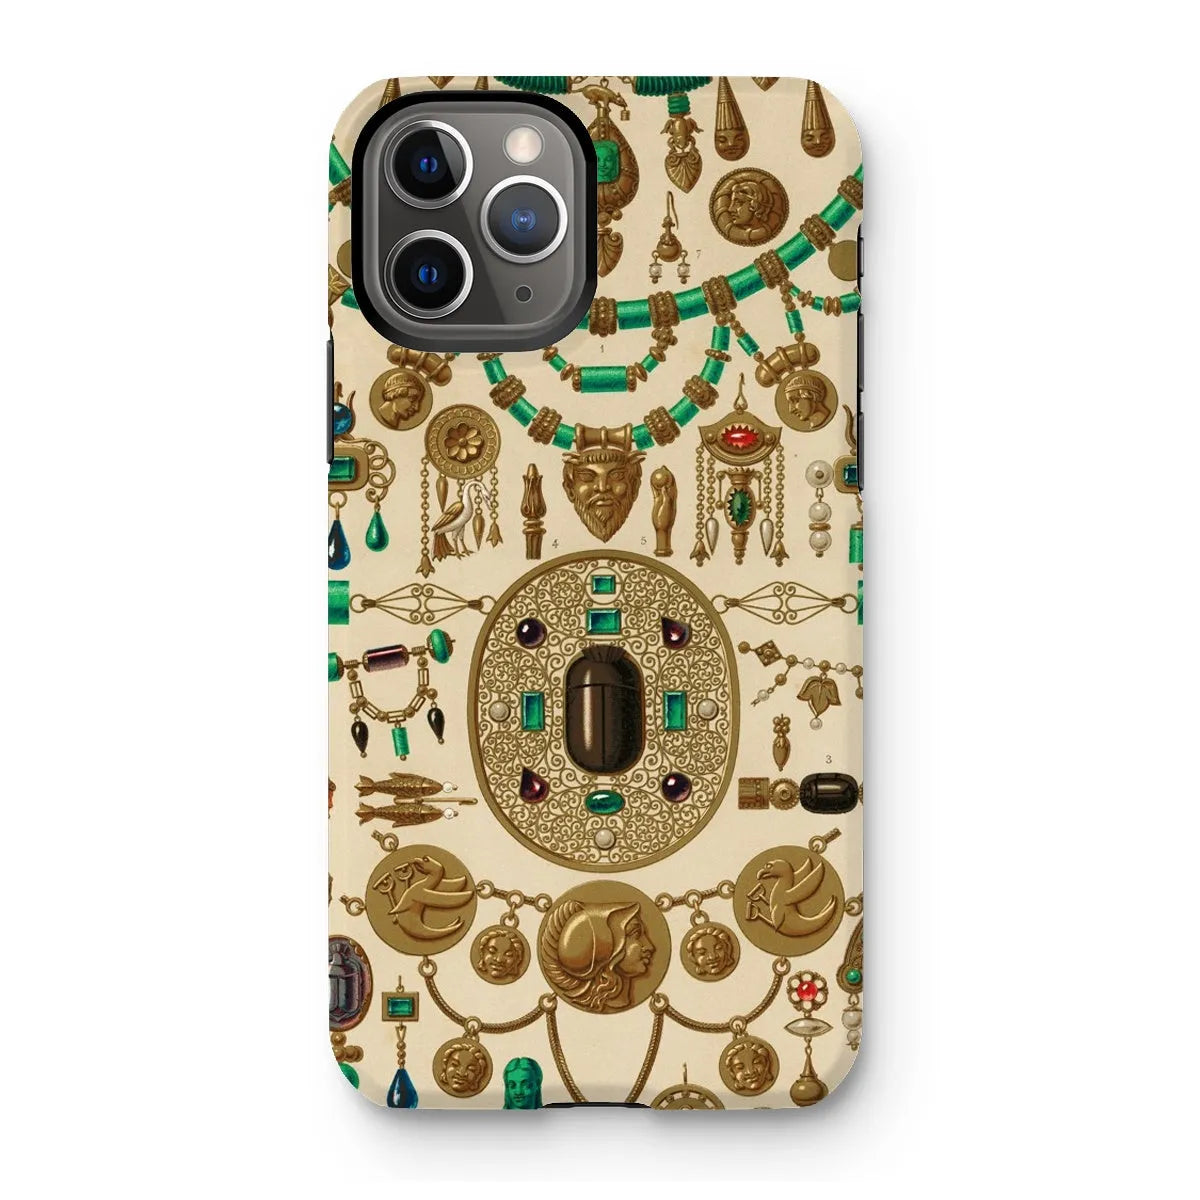 Etruscan Jewelry By Auguste Racinet Art Phone Case - Iphone 11 Pro / Matte - Mobile Phone Cases - Aesthetic Art